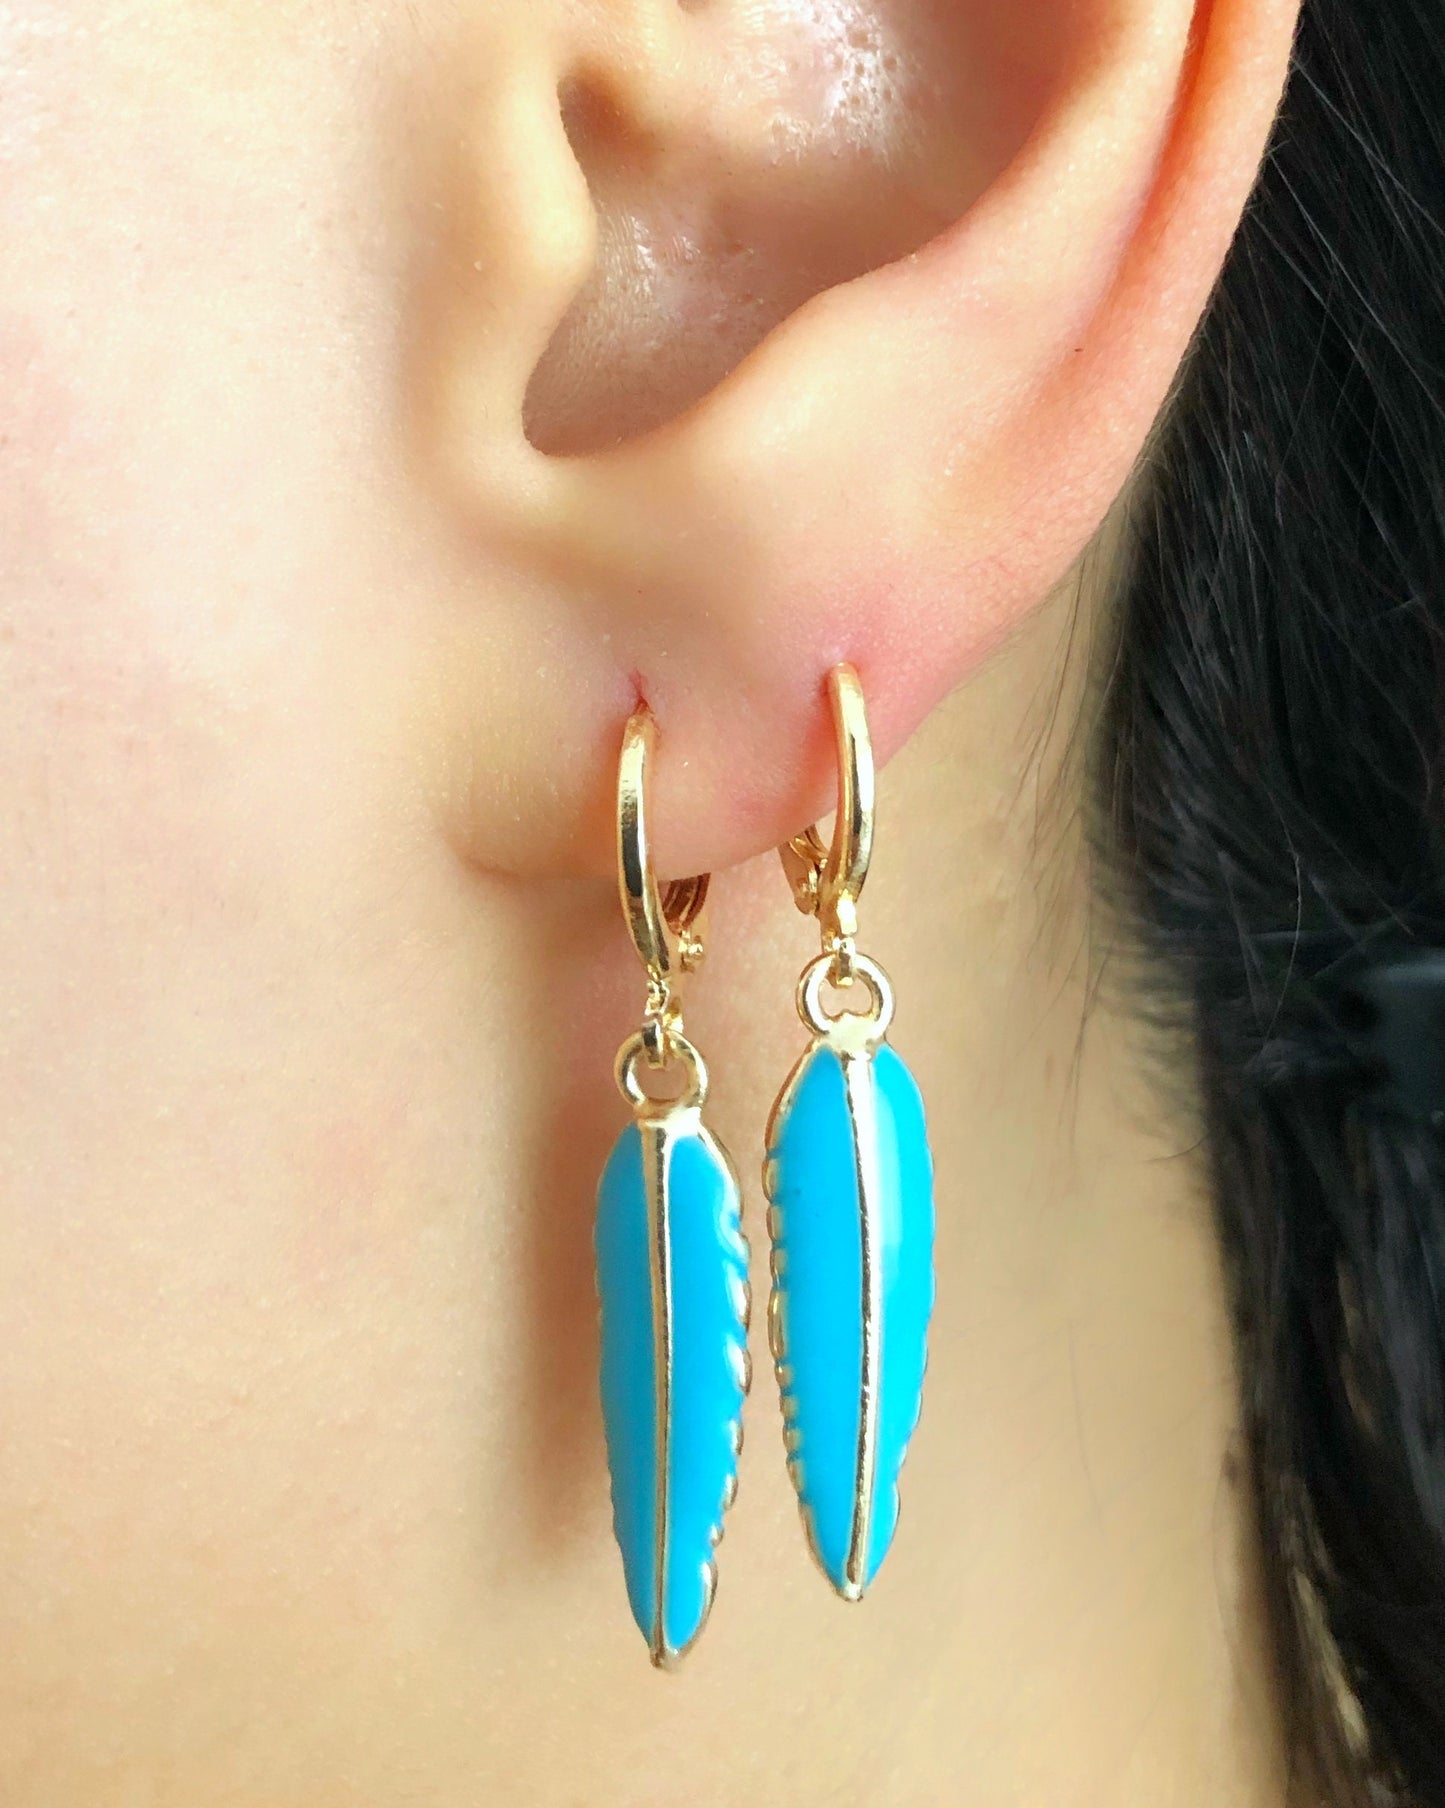 Black Feather Hoop Earring • White Feather Hoops • Turquoise Earrings